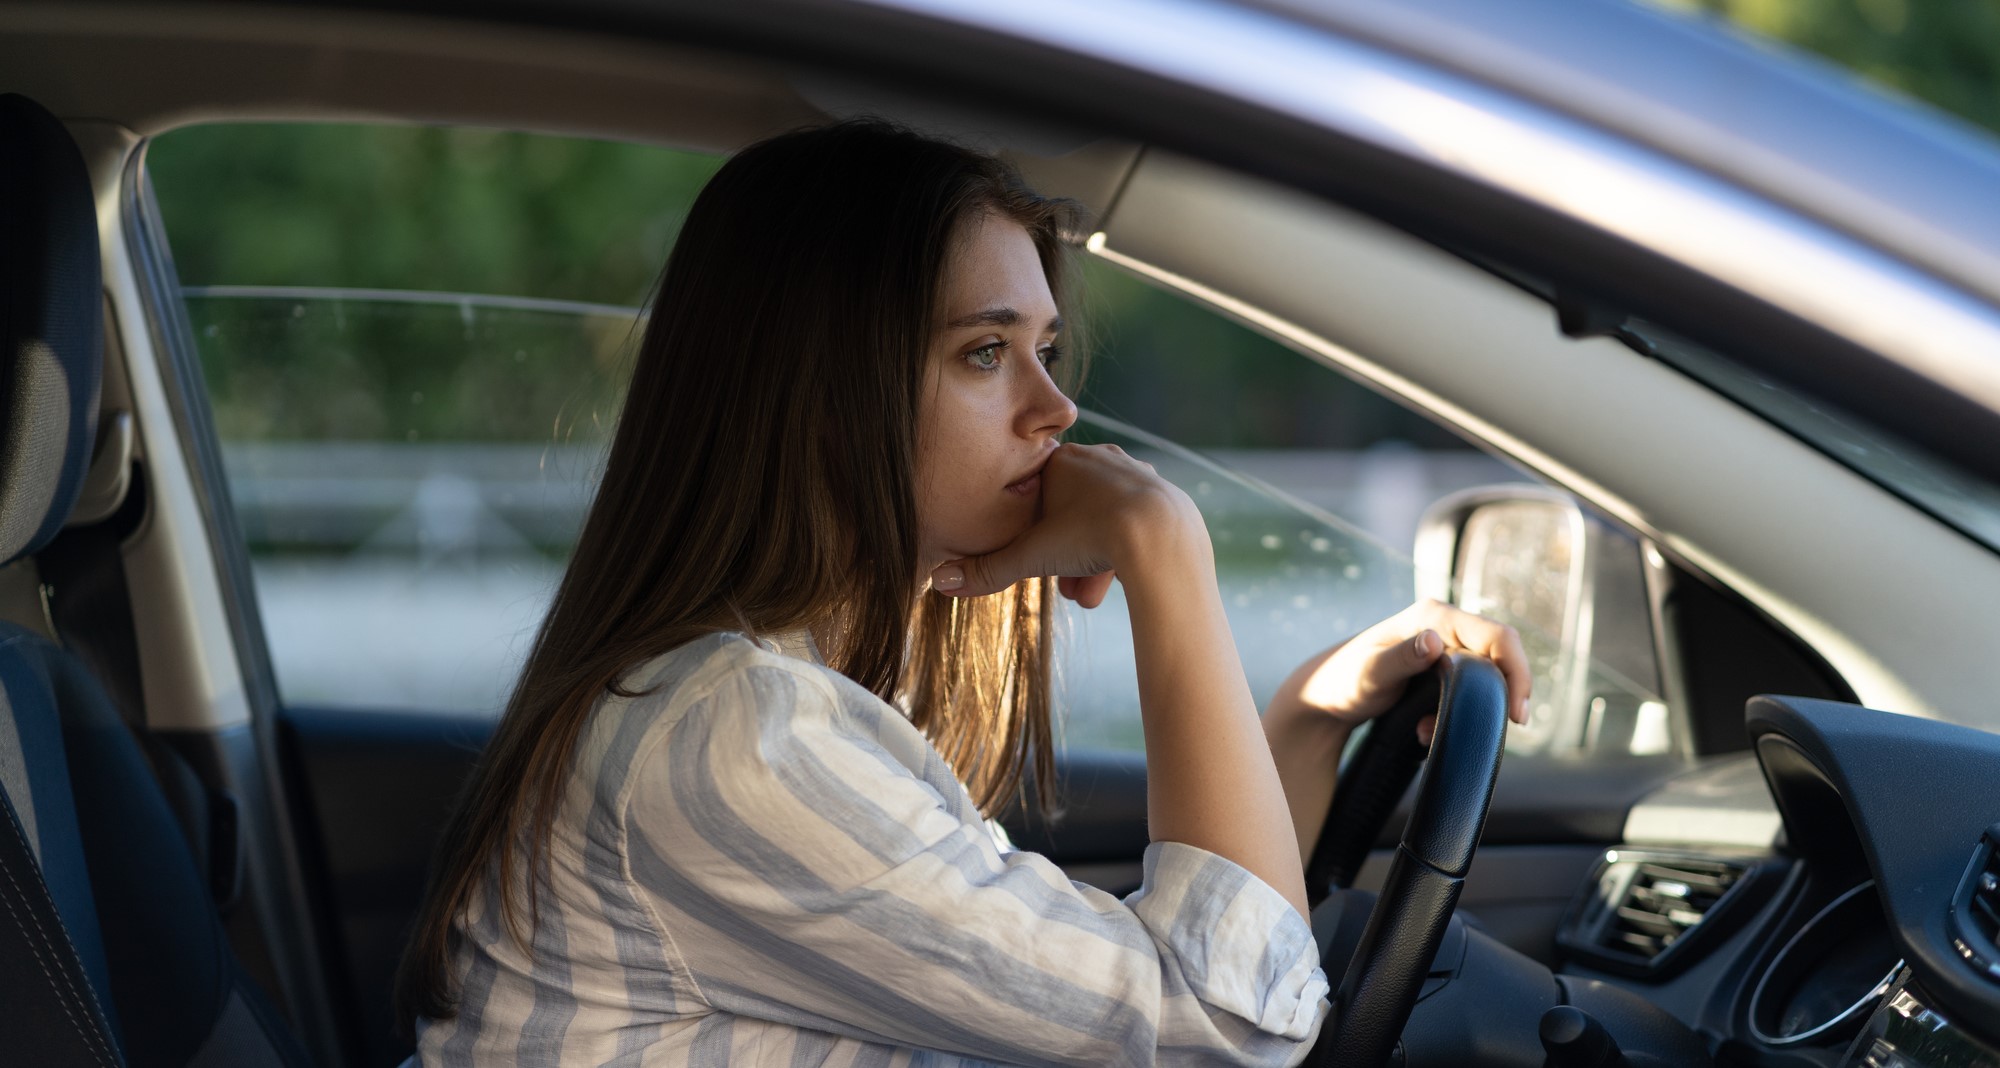 photo of a female struggling behind the wheel with PTSD, a common issue after being involved in a car accident, and grappling with the fear of driving after an accident